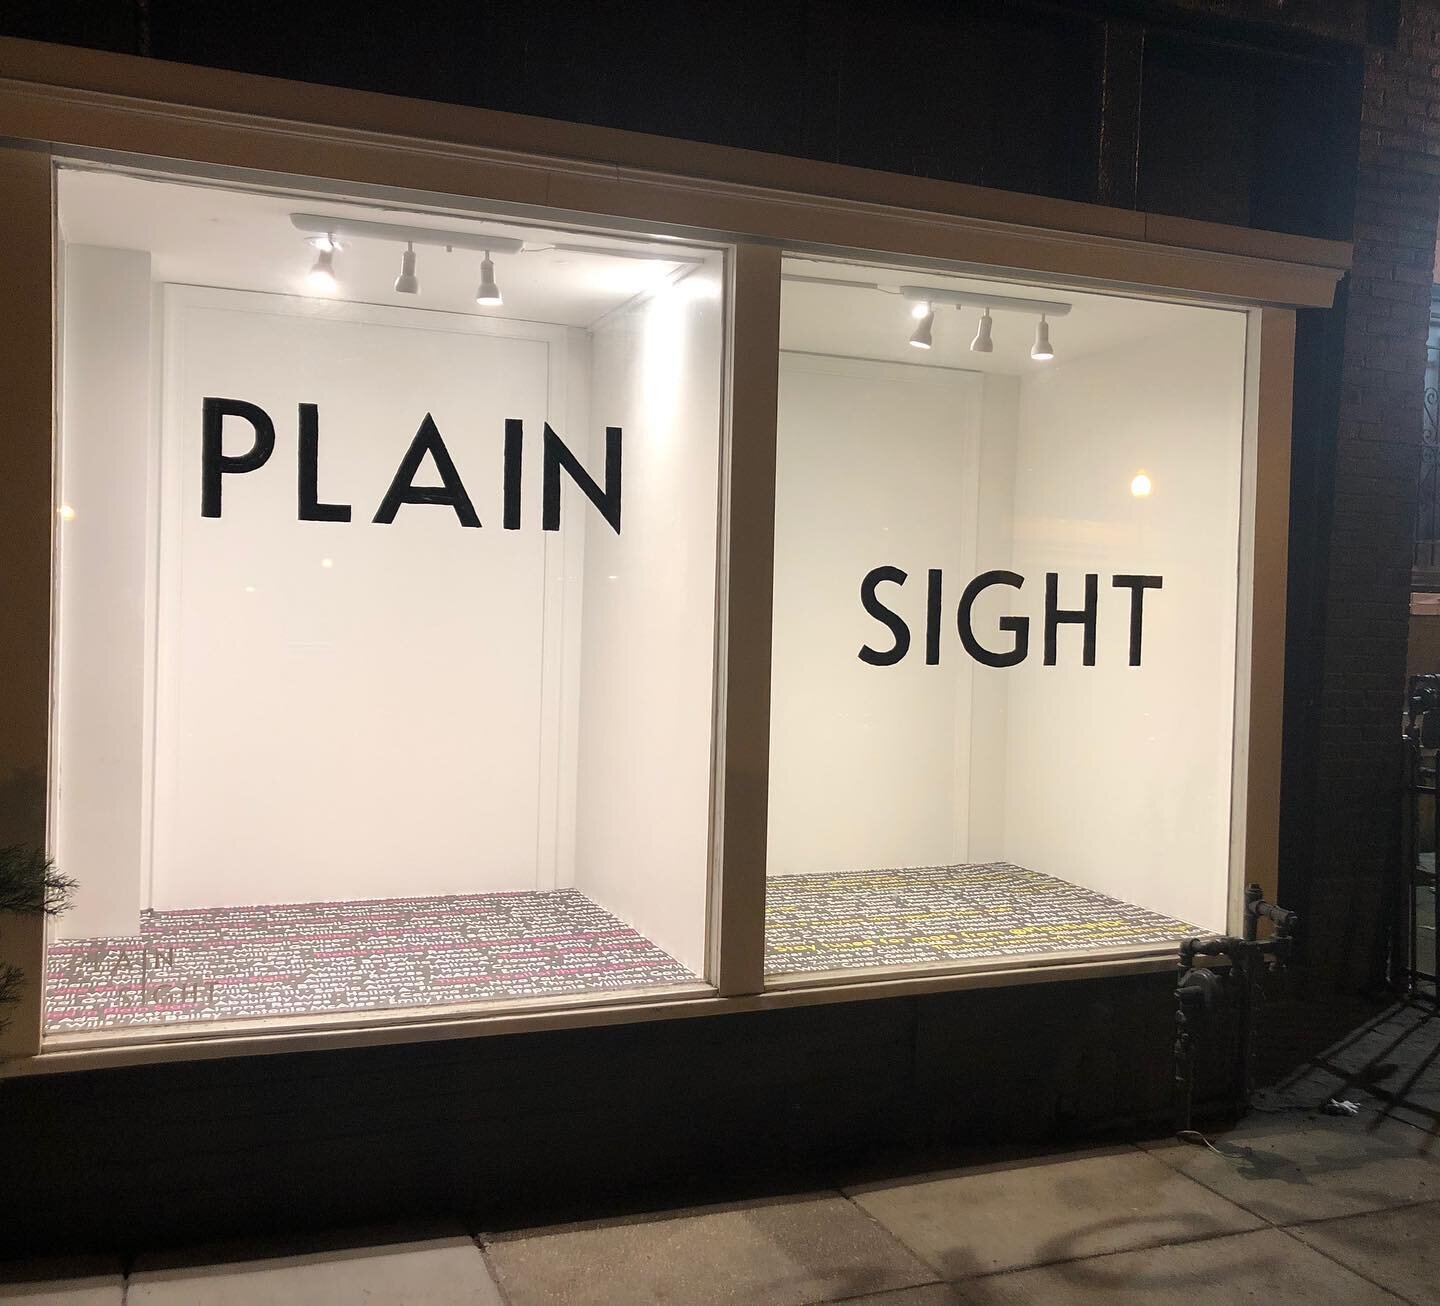 And that&rsquo;s a wrap (for now) for Plain Sight as we say goodbye to 3218 Georgia Avenue! We have loved every minute of transforming this closed up storefront to a place where anyone could access contemporary art. This was a labor of love for us an